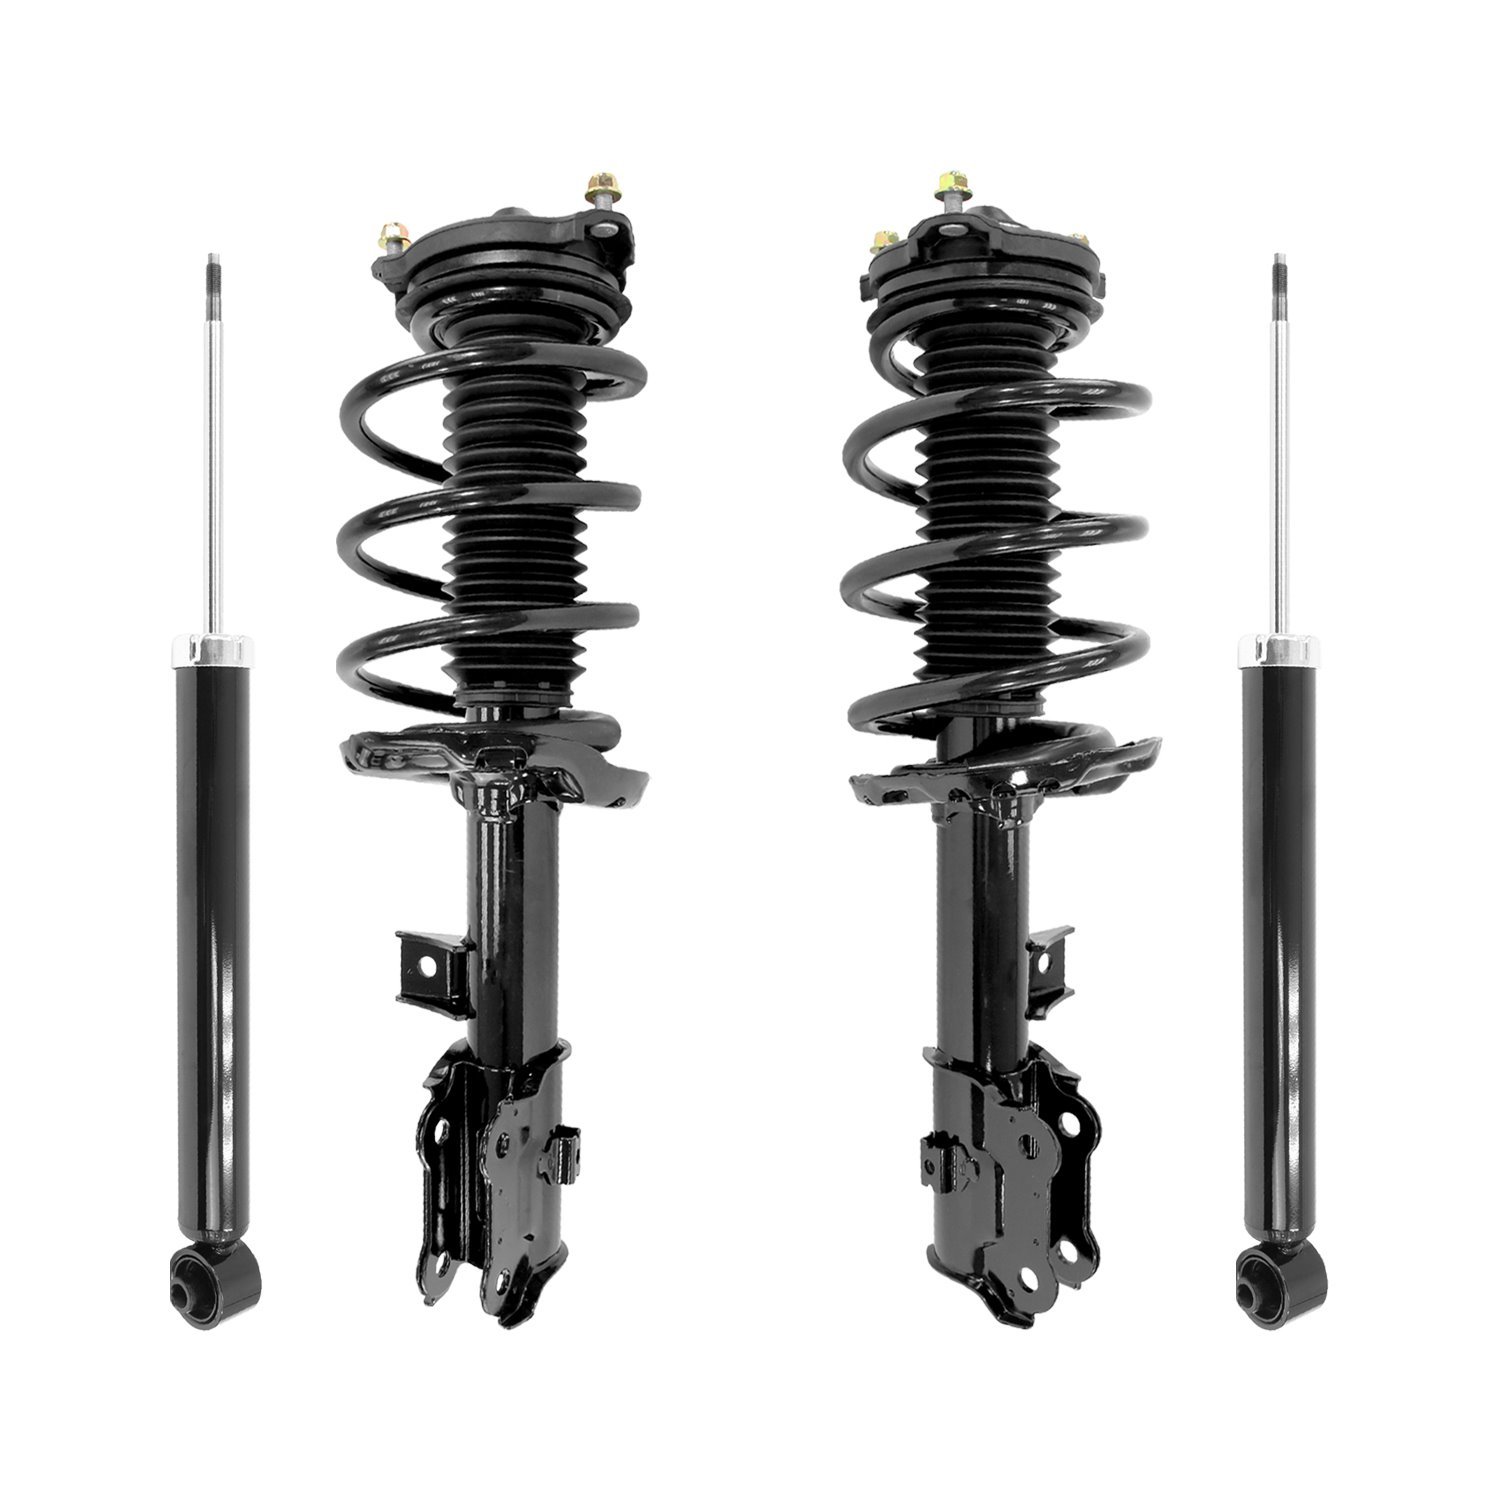 4-13011-259460-001 Front & Rear Complete Strut Assembly Shock Absorber Kit Fits Select Kia Sportage, Hyundai Tucson